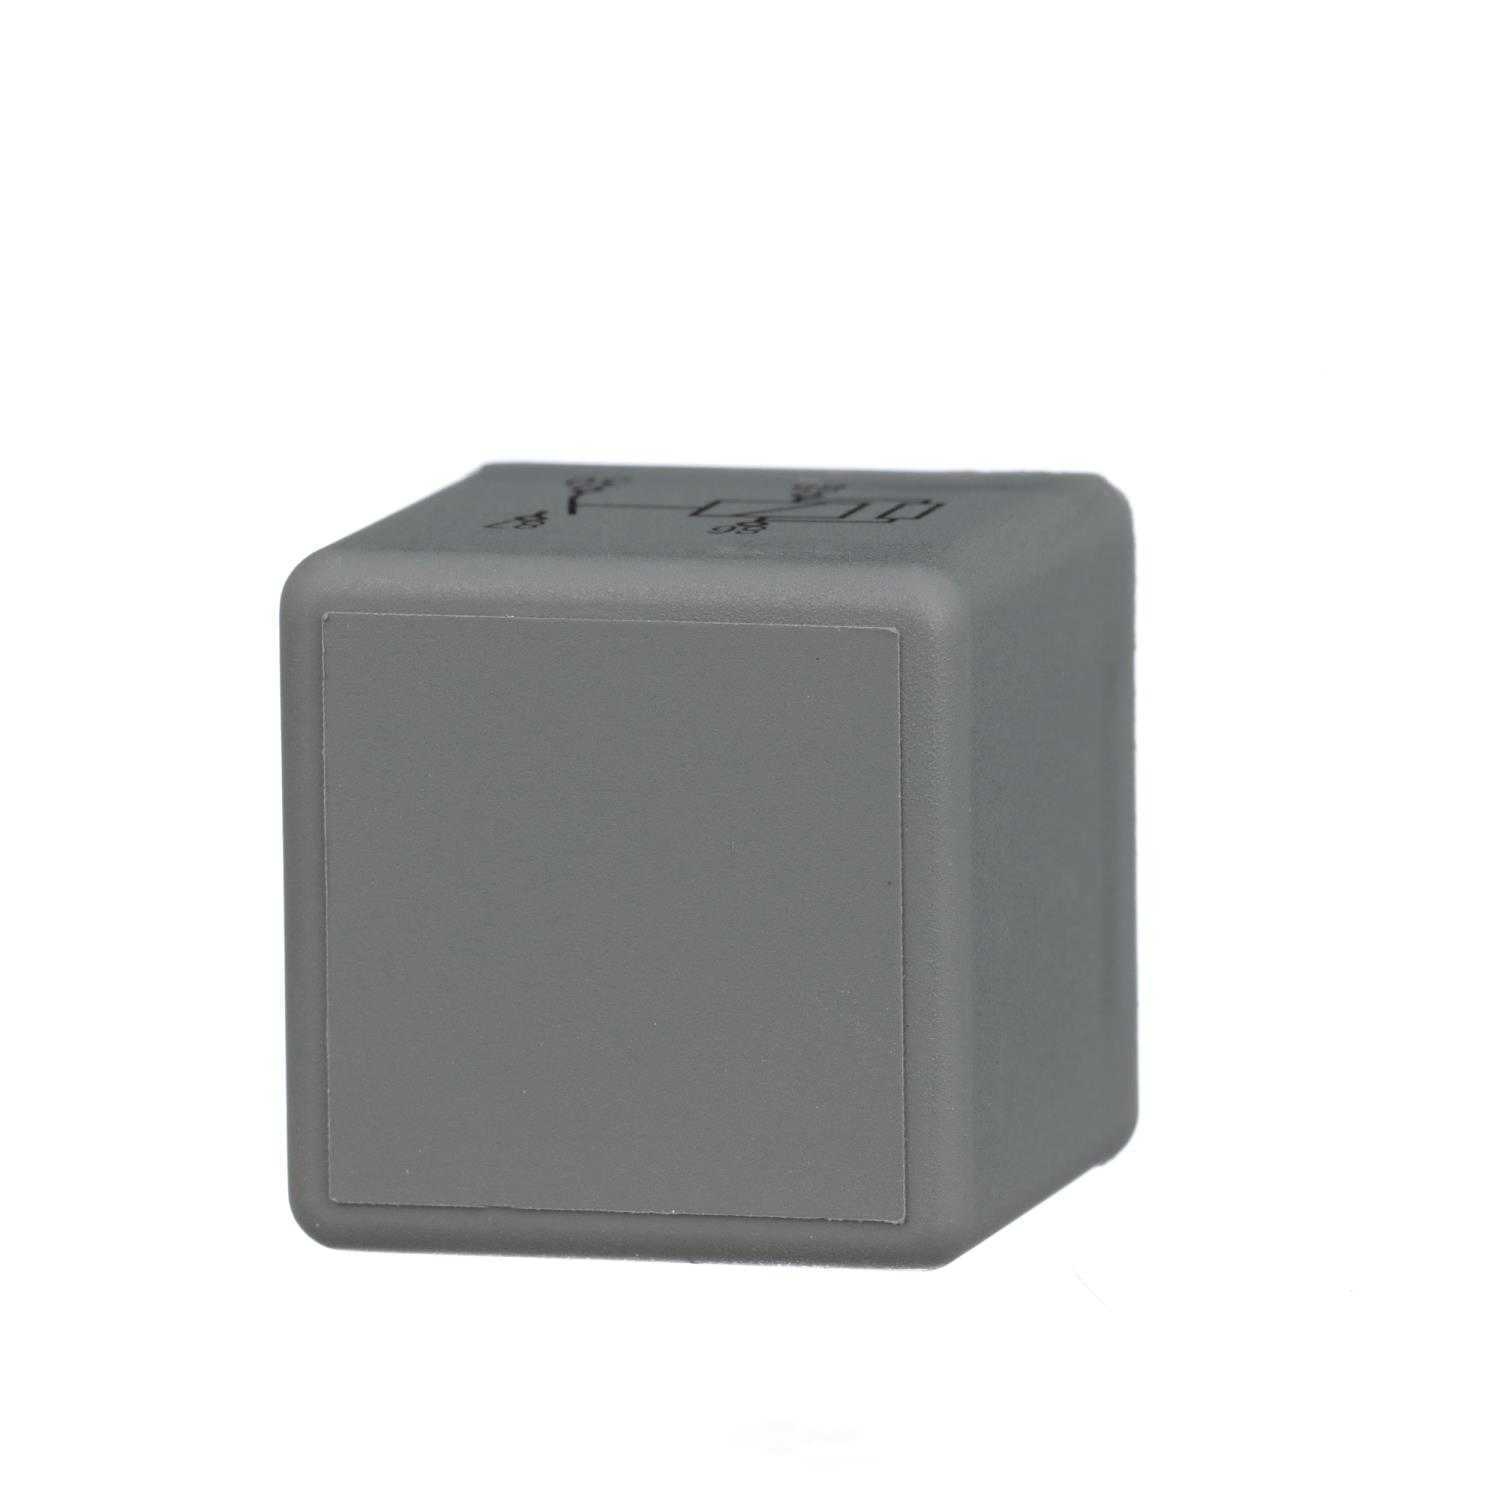 STANDARD MOTOR PRODUCTS - Multi Purpose Relay - STA RY-961